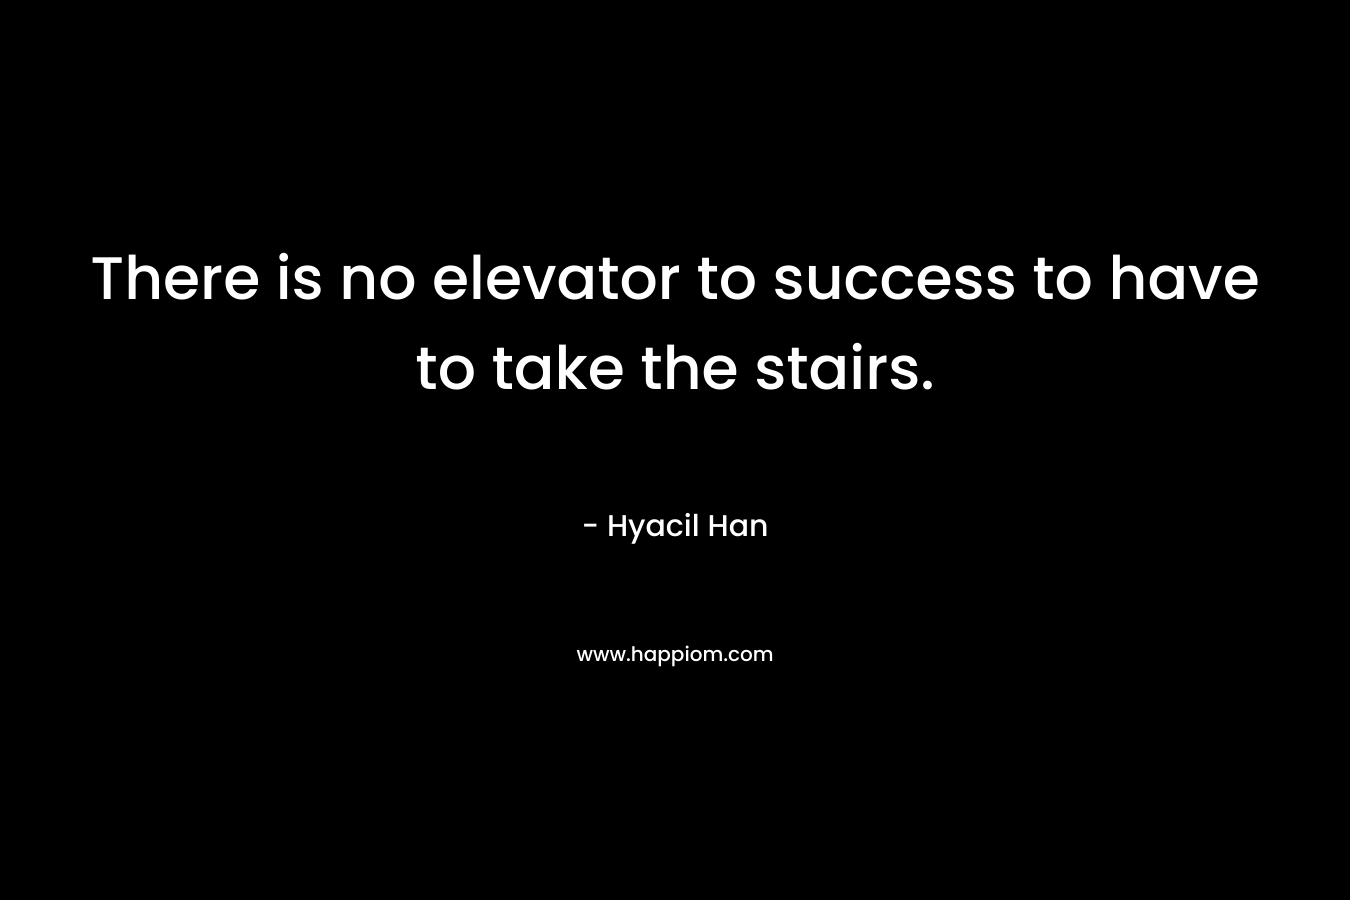 There is no elevator to success to have to take the stairs.